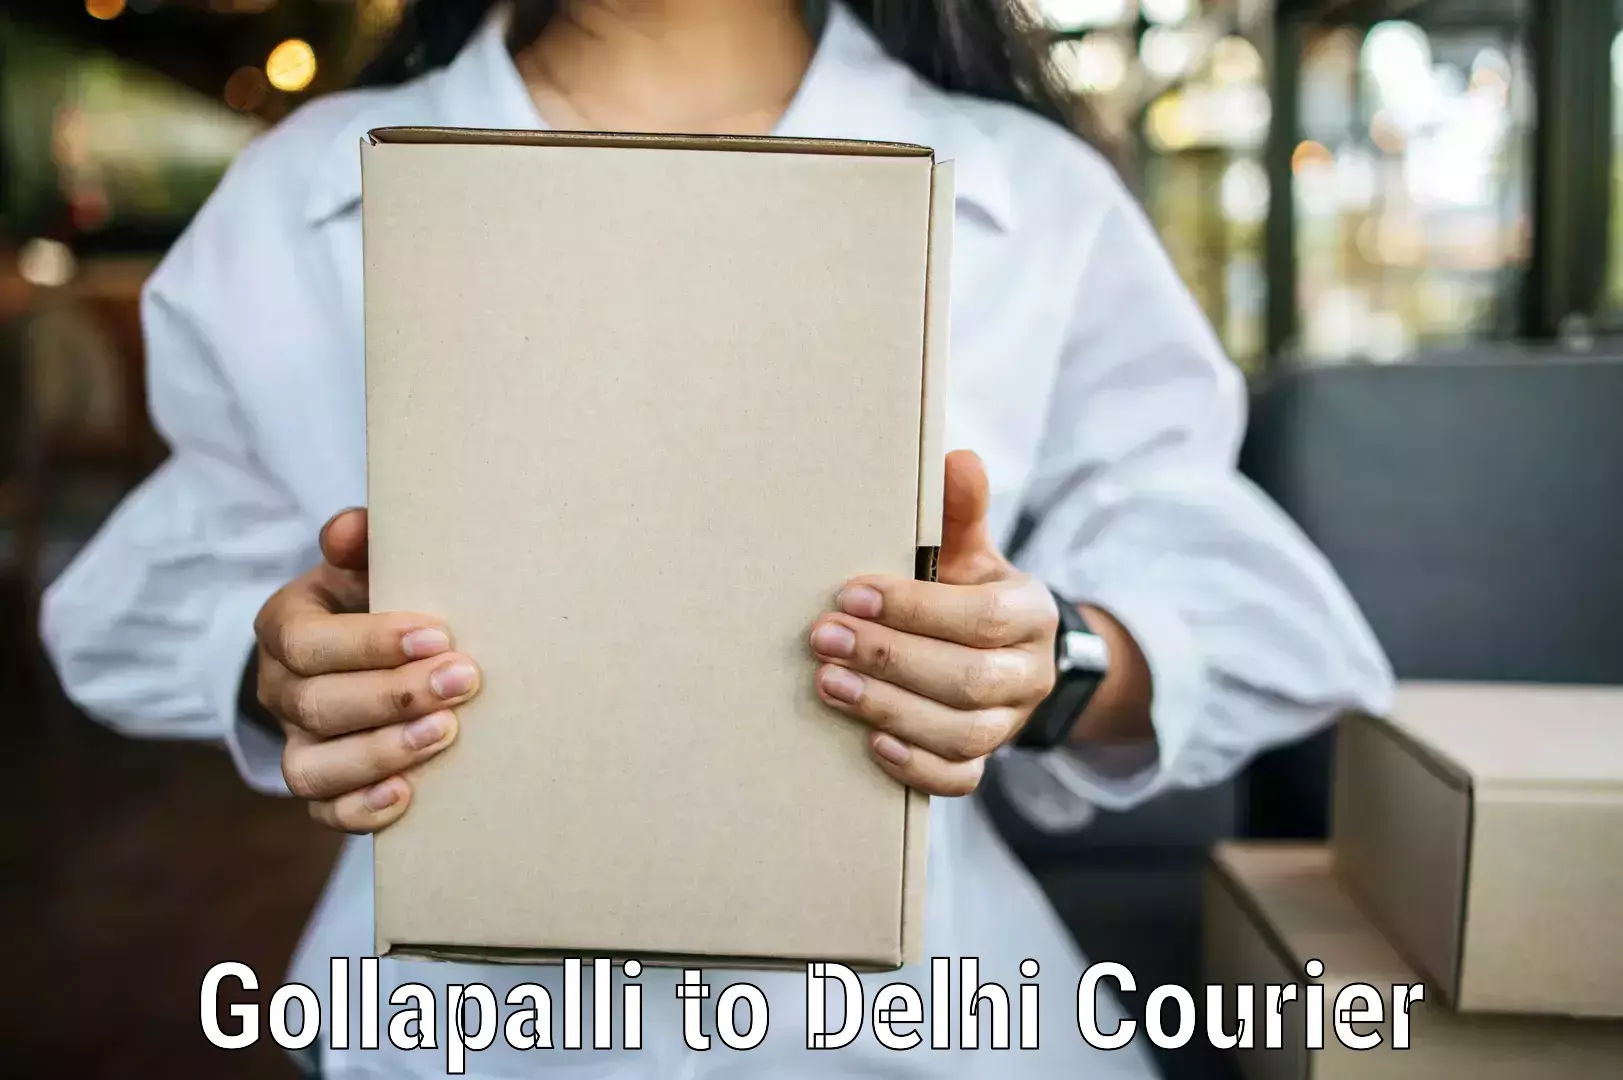 User-friendly courier app Gollapalli to Lodhi Road